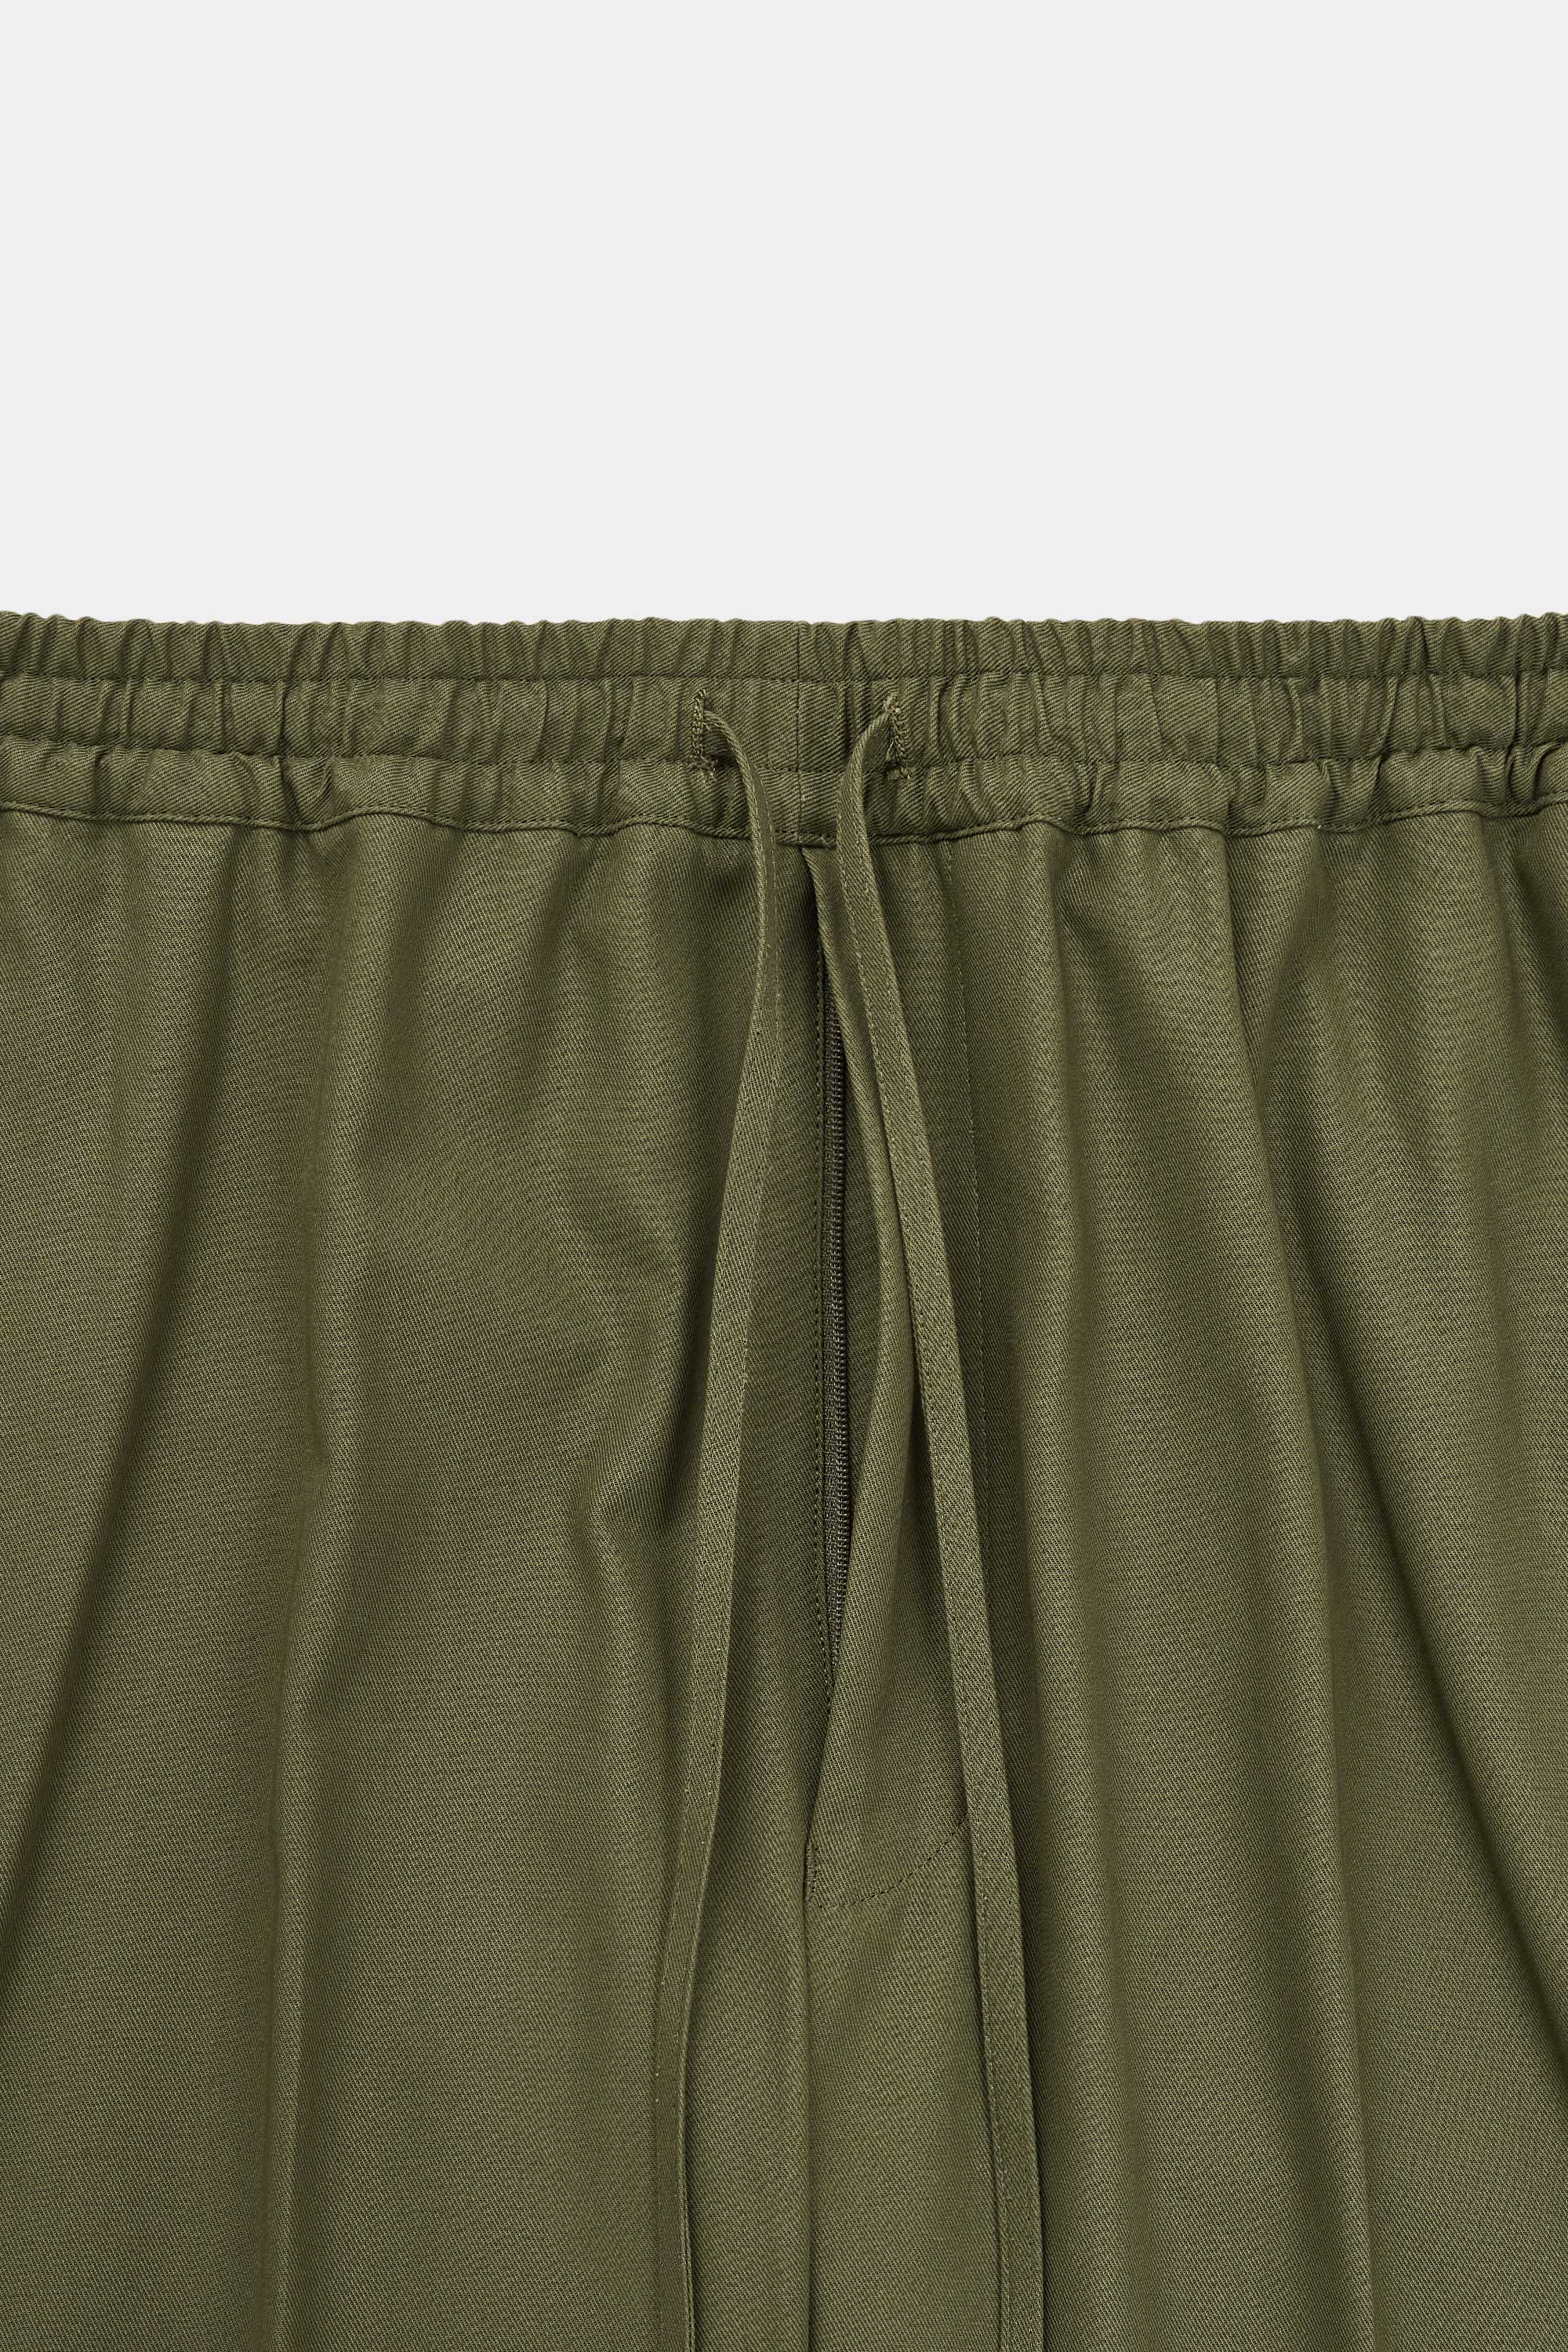 Organic Cotton Dry Twill Classic Fit Easy Pants, Olive